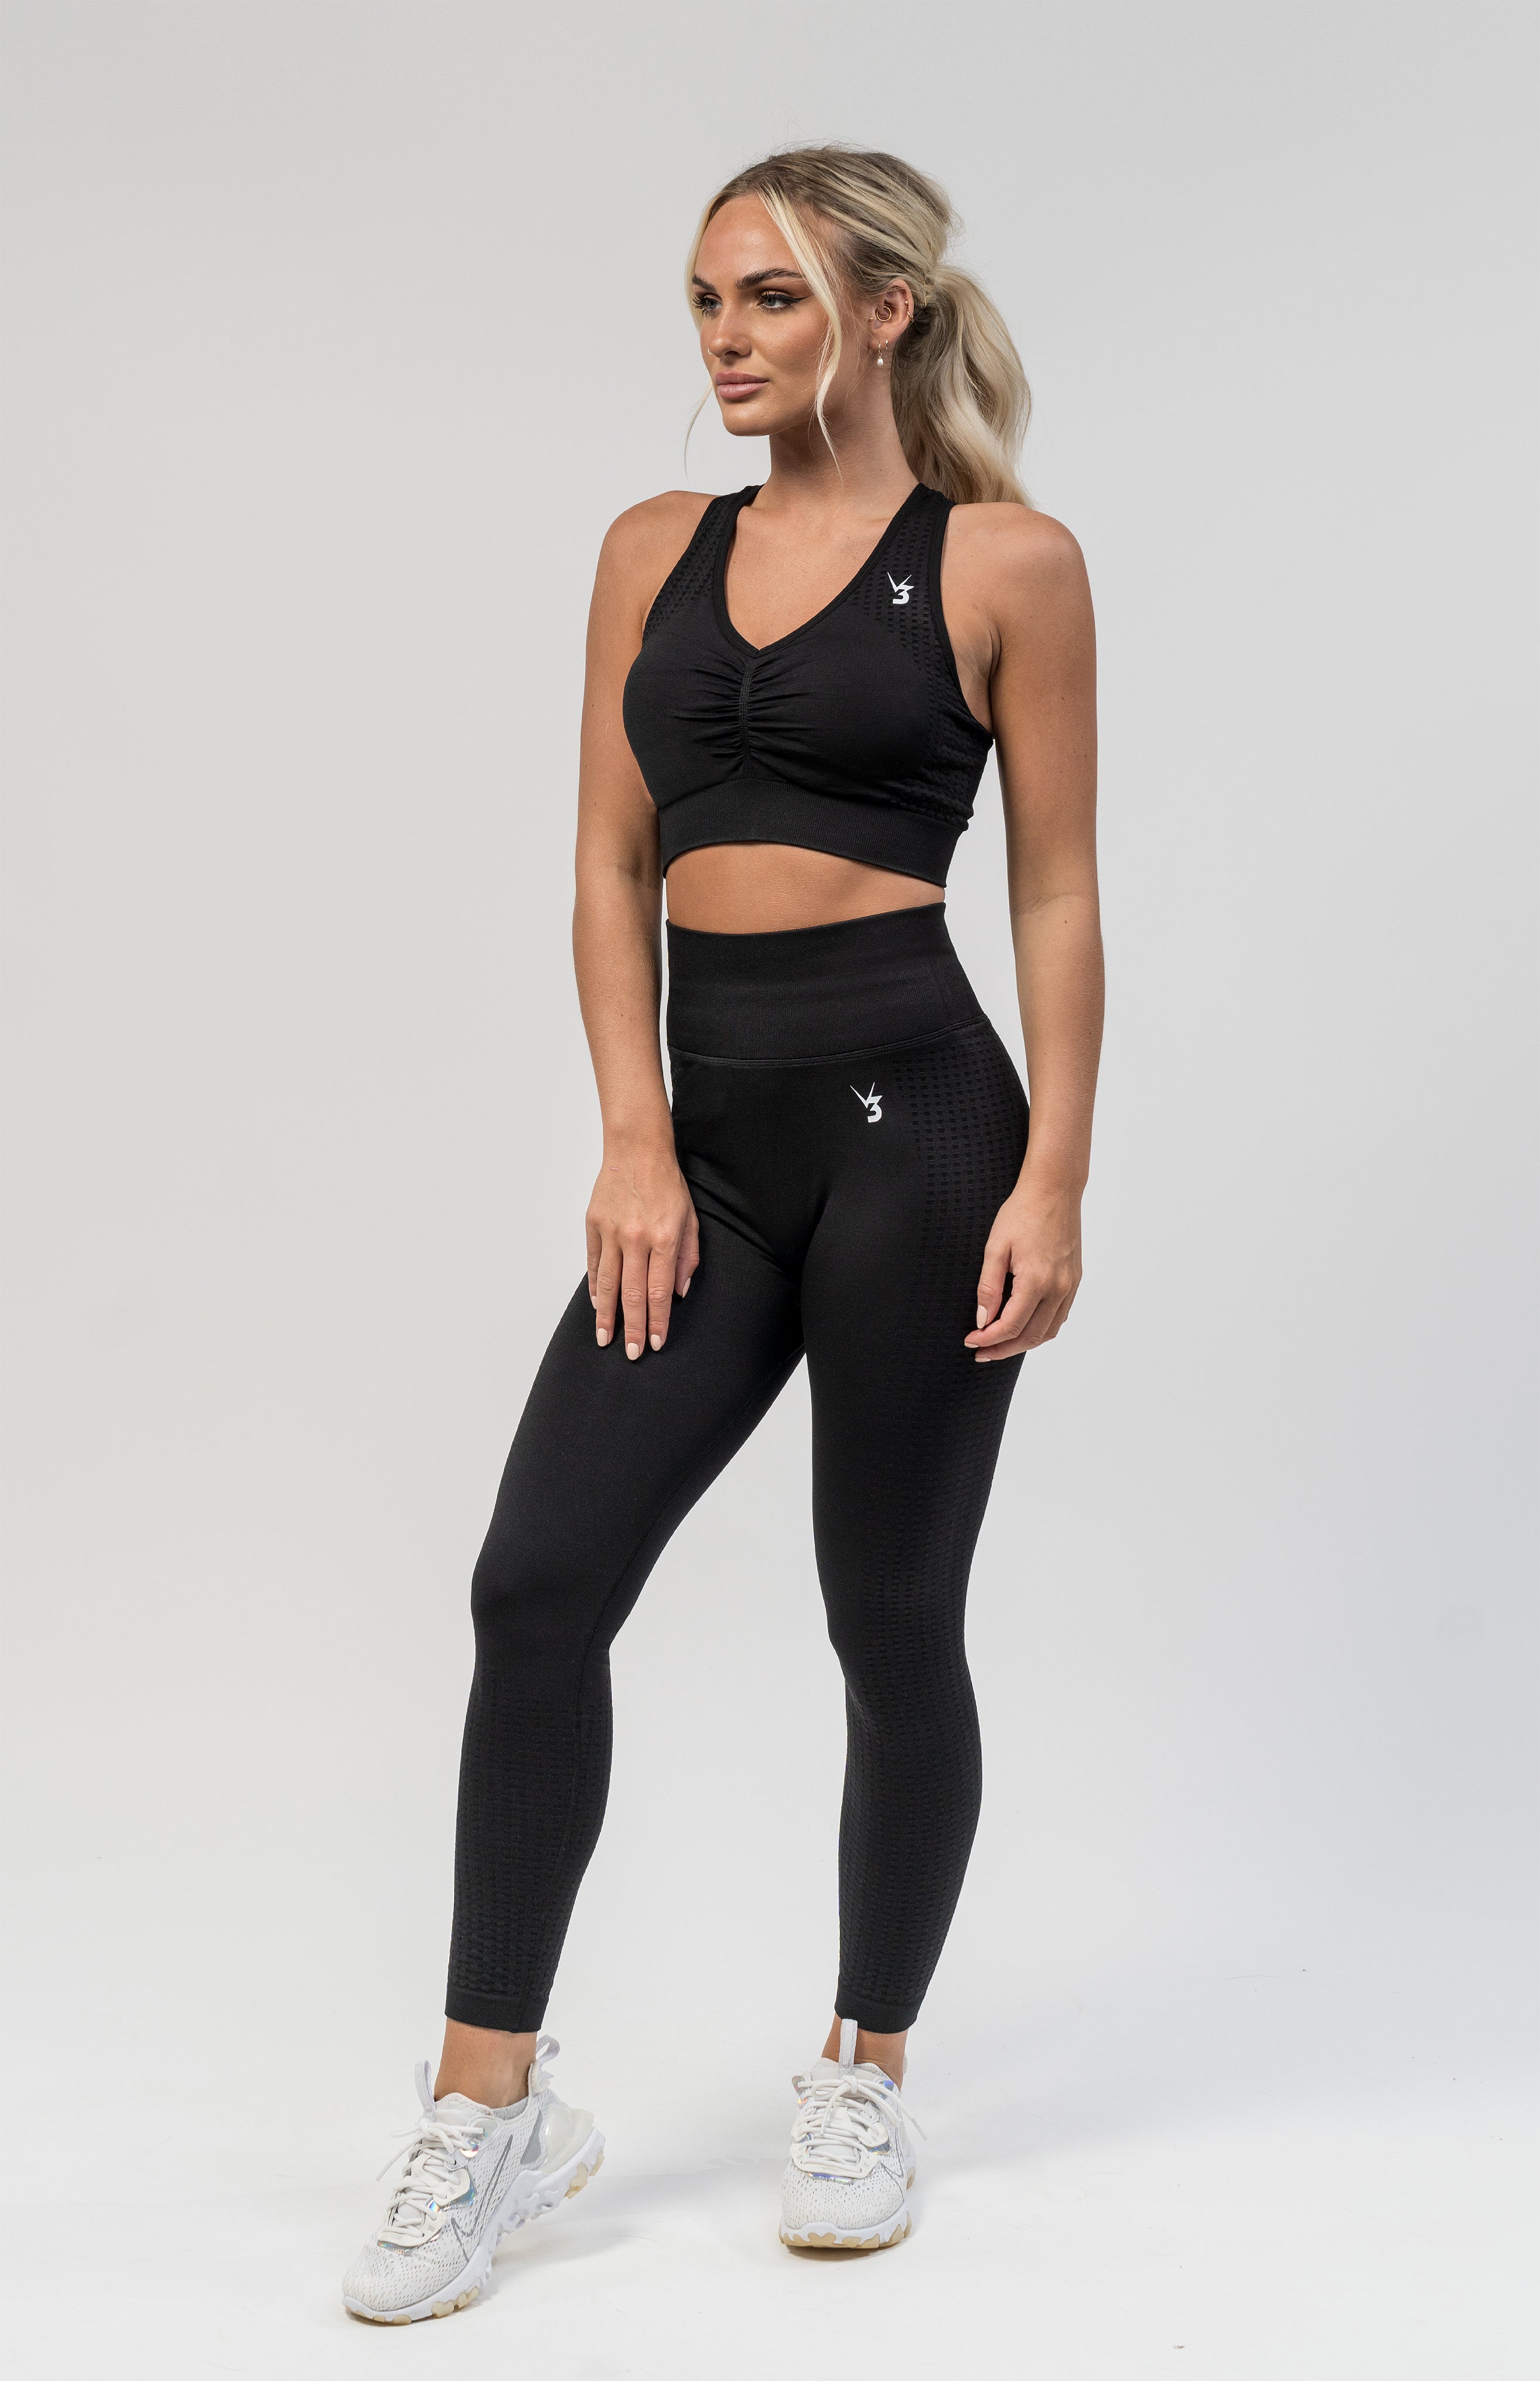 V3 Apparel Women's seamless Empower bum shaping high waisted leggings in black marl – Squat proof performance tights for Gym workouts training, Running, yoga, bodybuilding and bikini fitness.